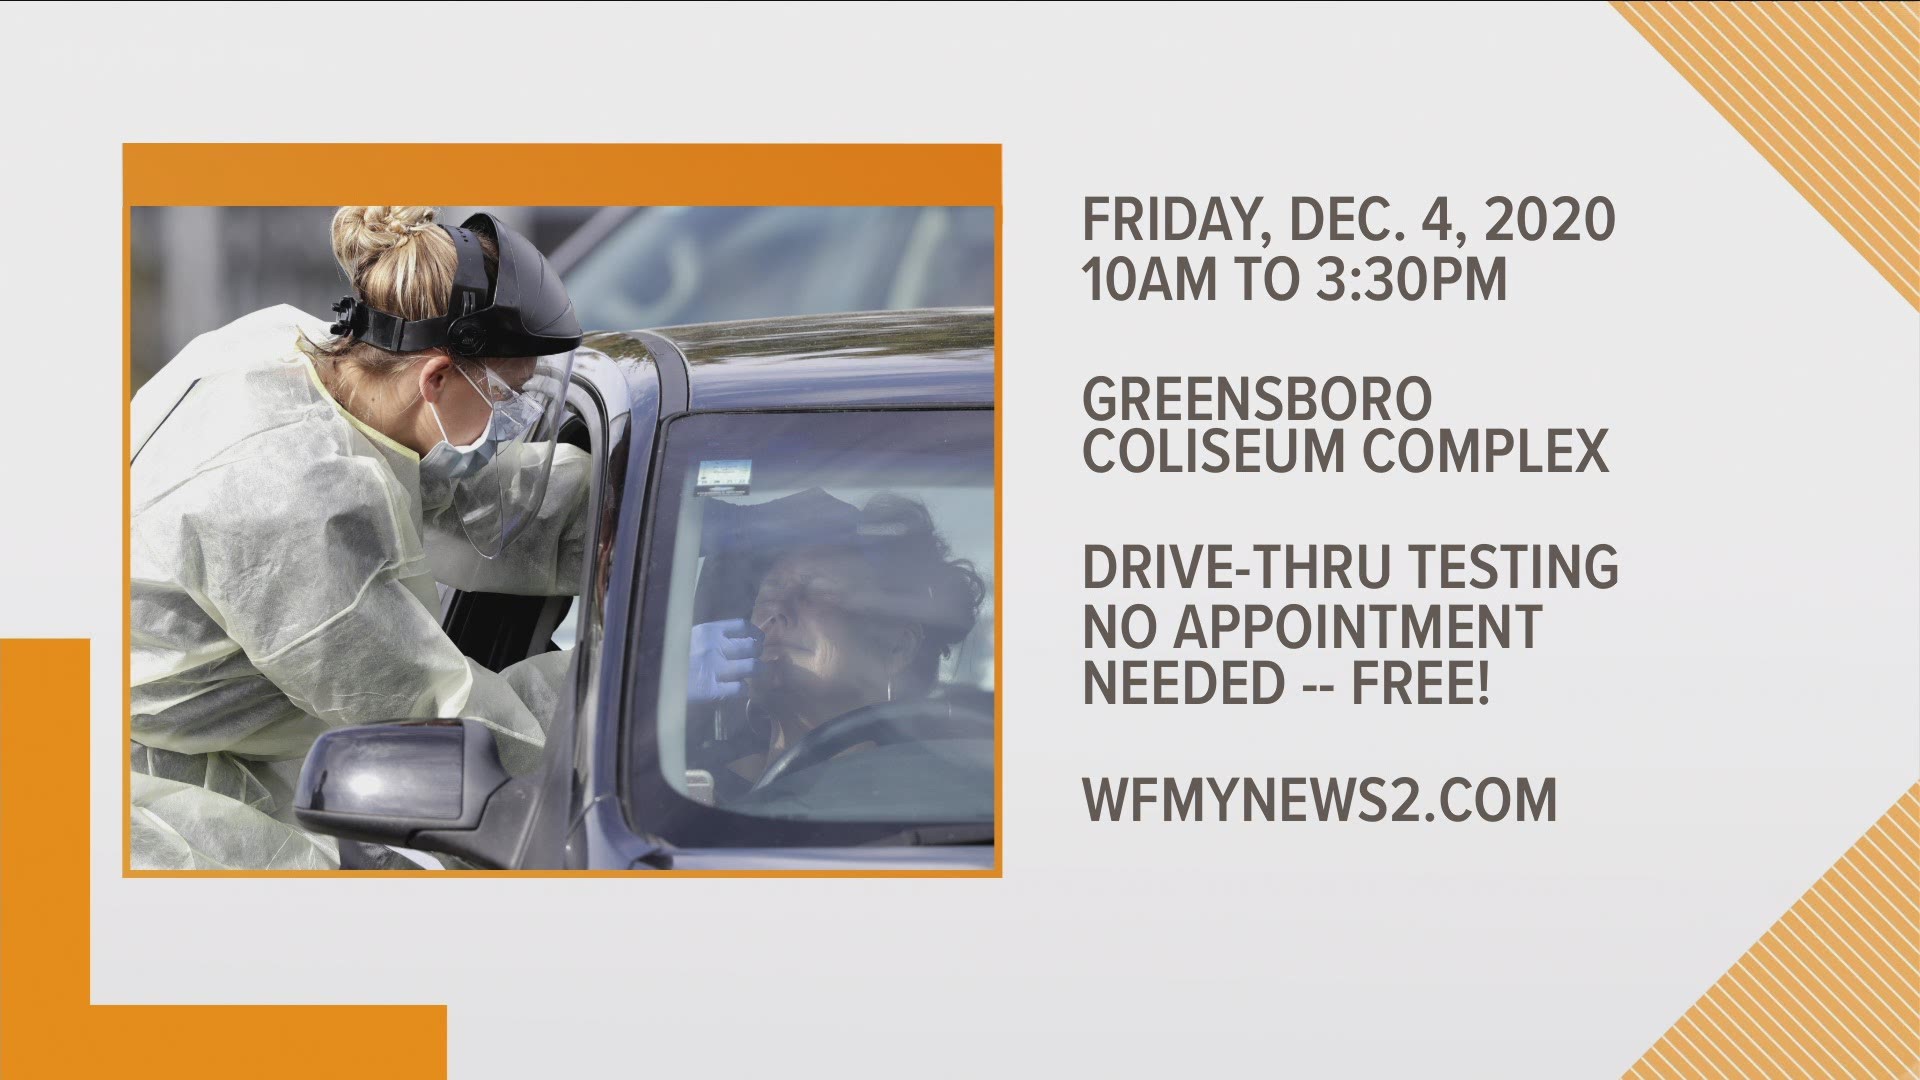 Following stern travel warnings for Thanksgiving, Guilford County Emergency Management and Cone Health will hold a free COVID-19 community-testing event.